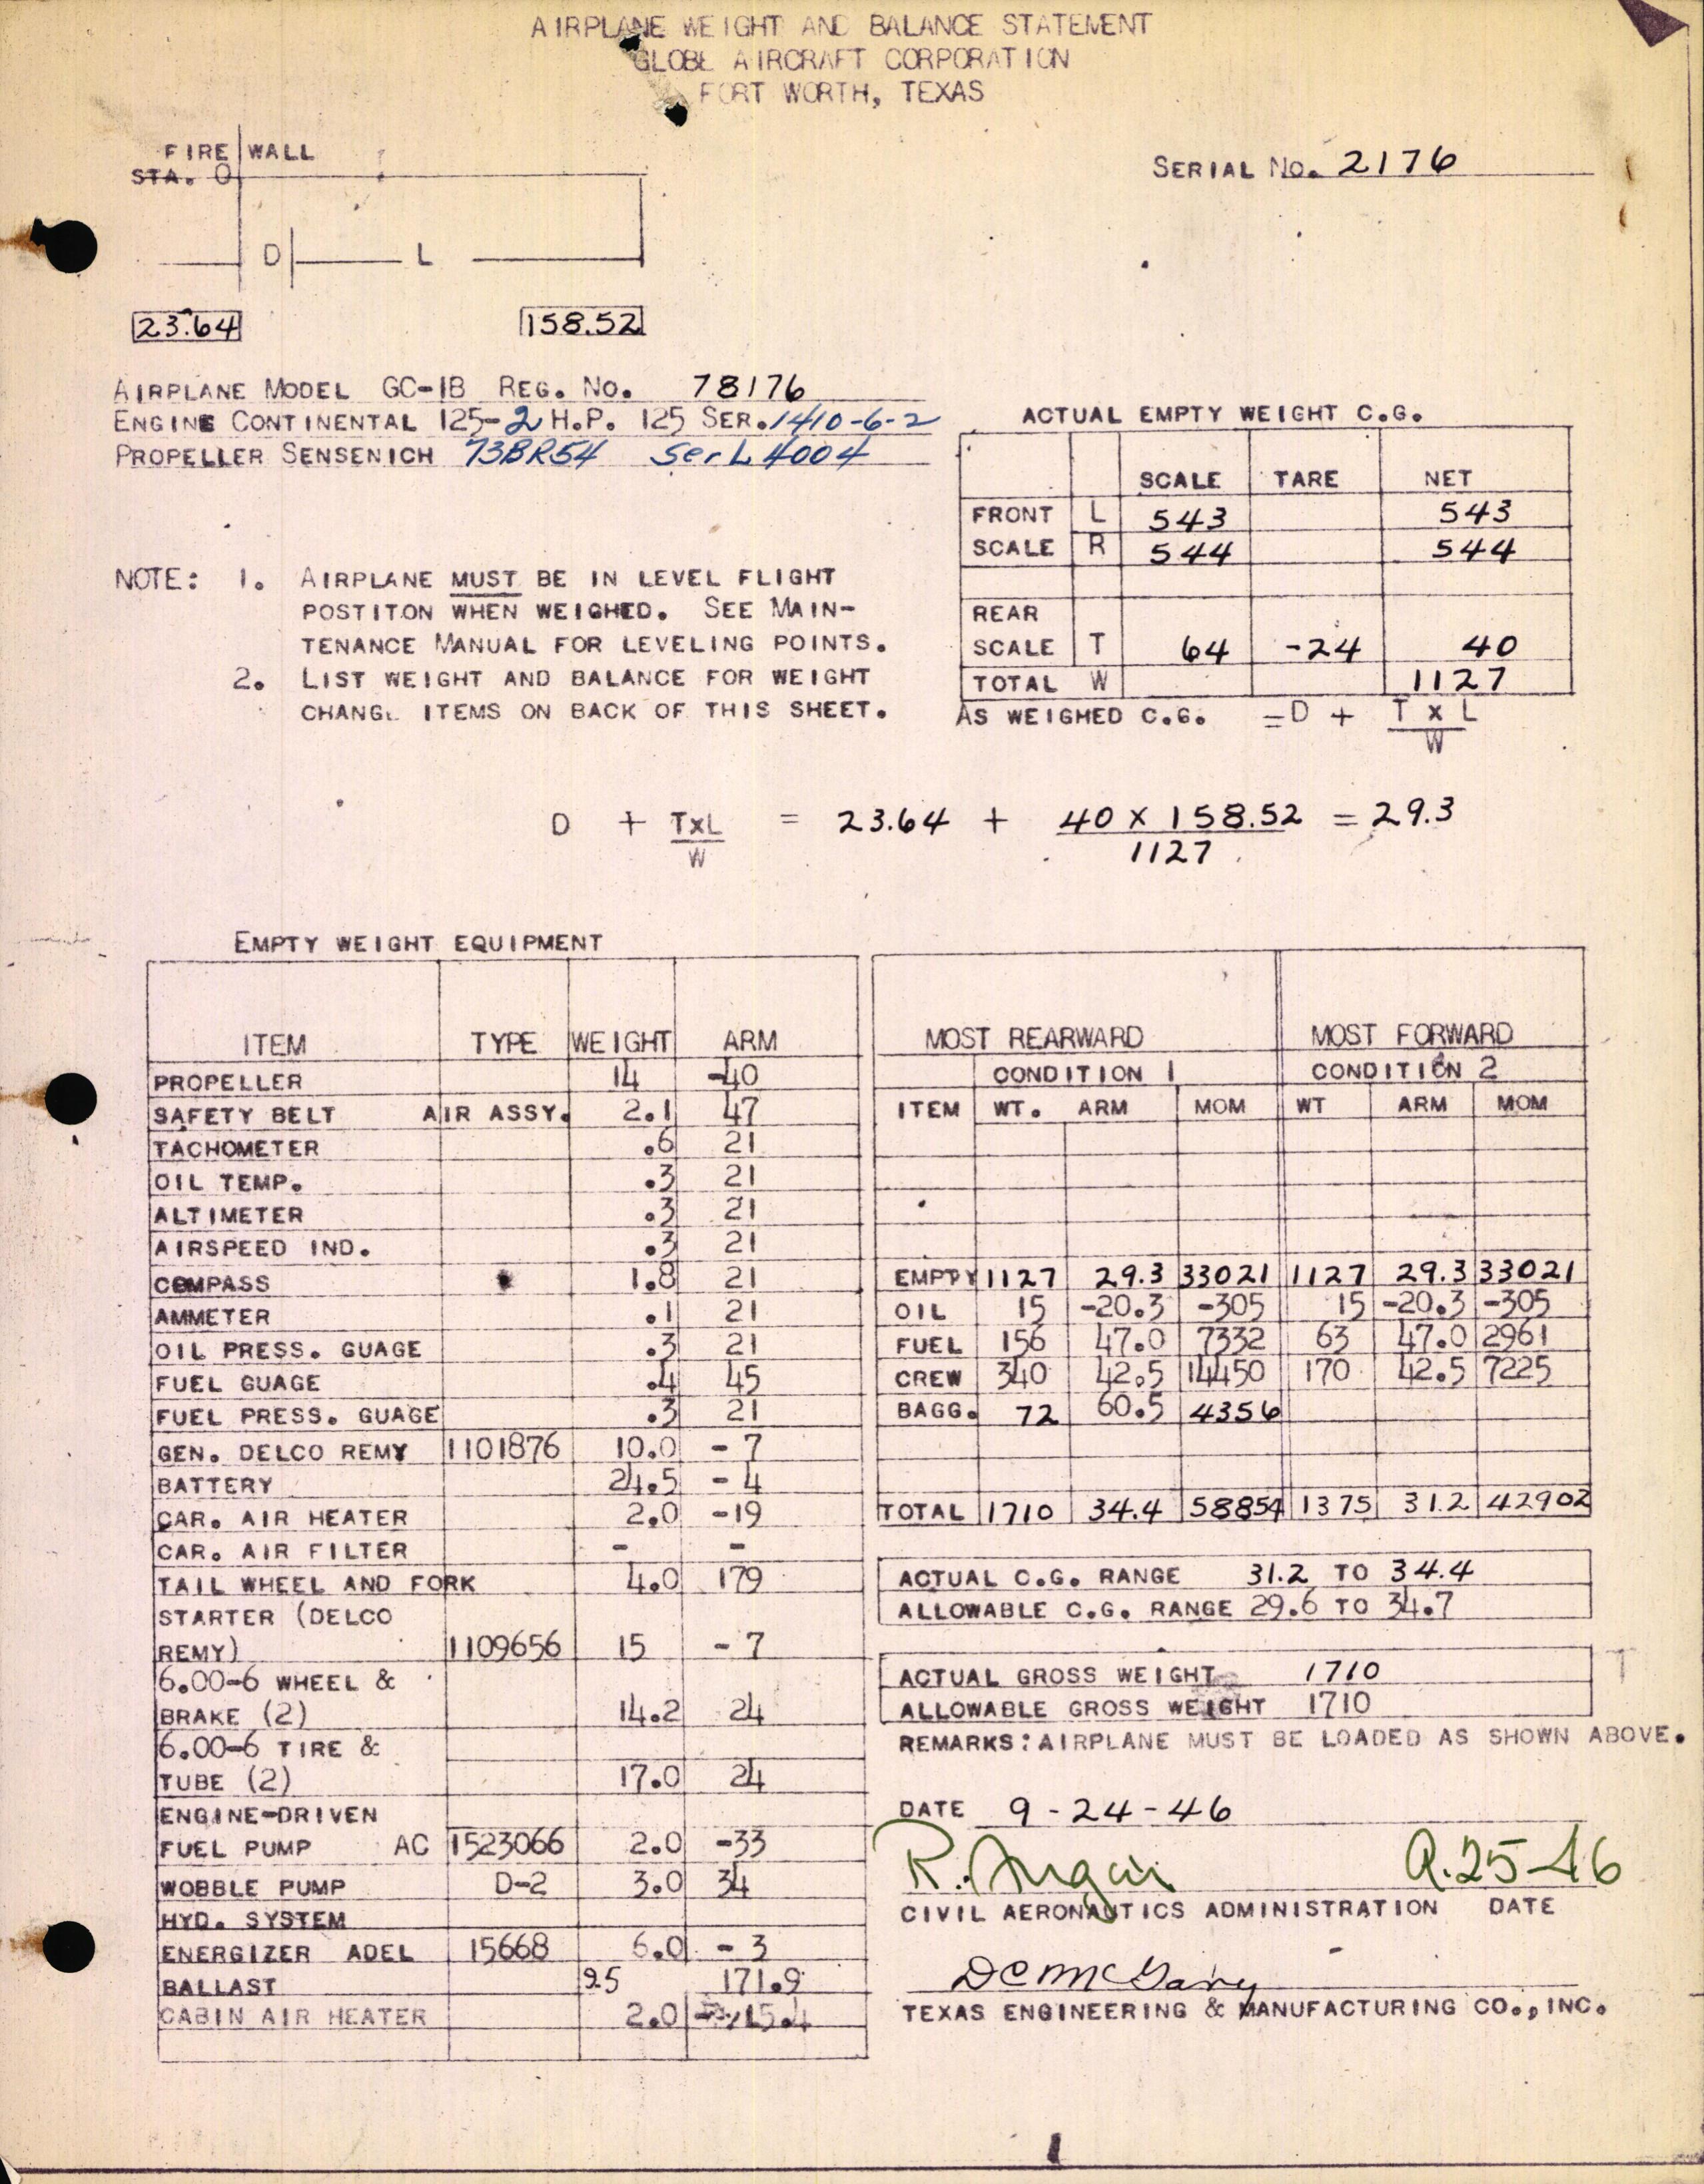 Sample page 3 from AirCorps Library document: Technical Information for Serial Number 2176